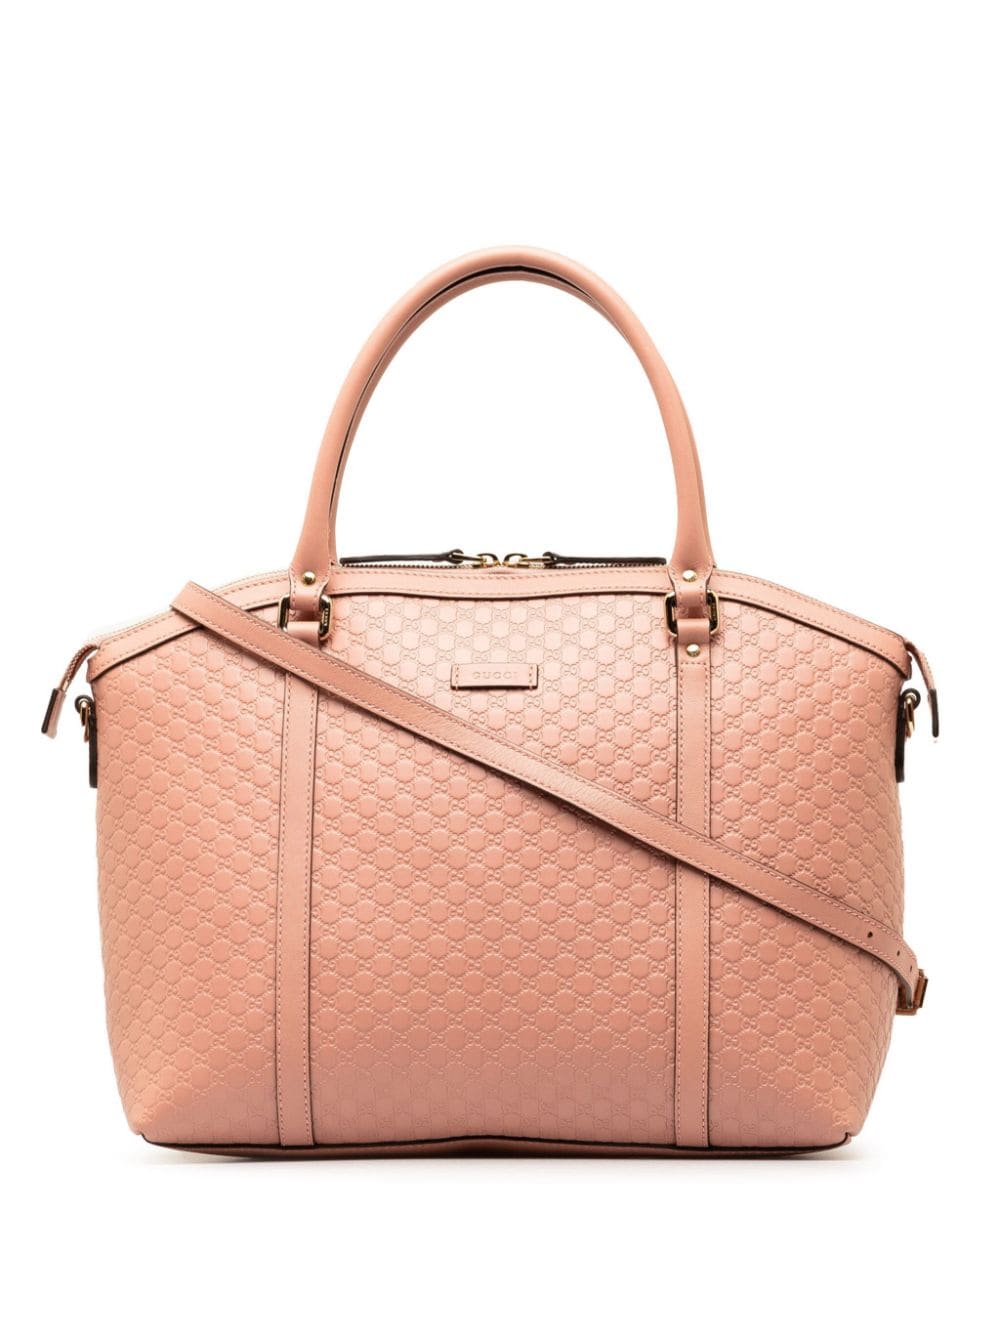 Pre-owned Gucci 2000-2015 Large Microssima Dome Satchel In Pink